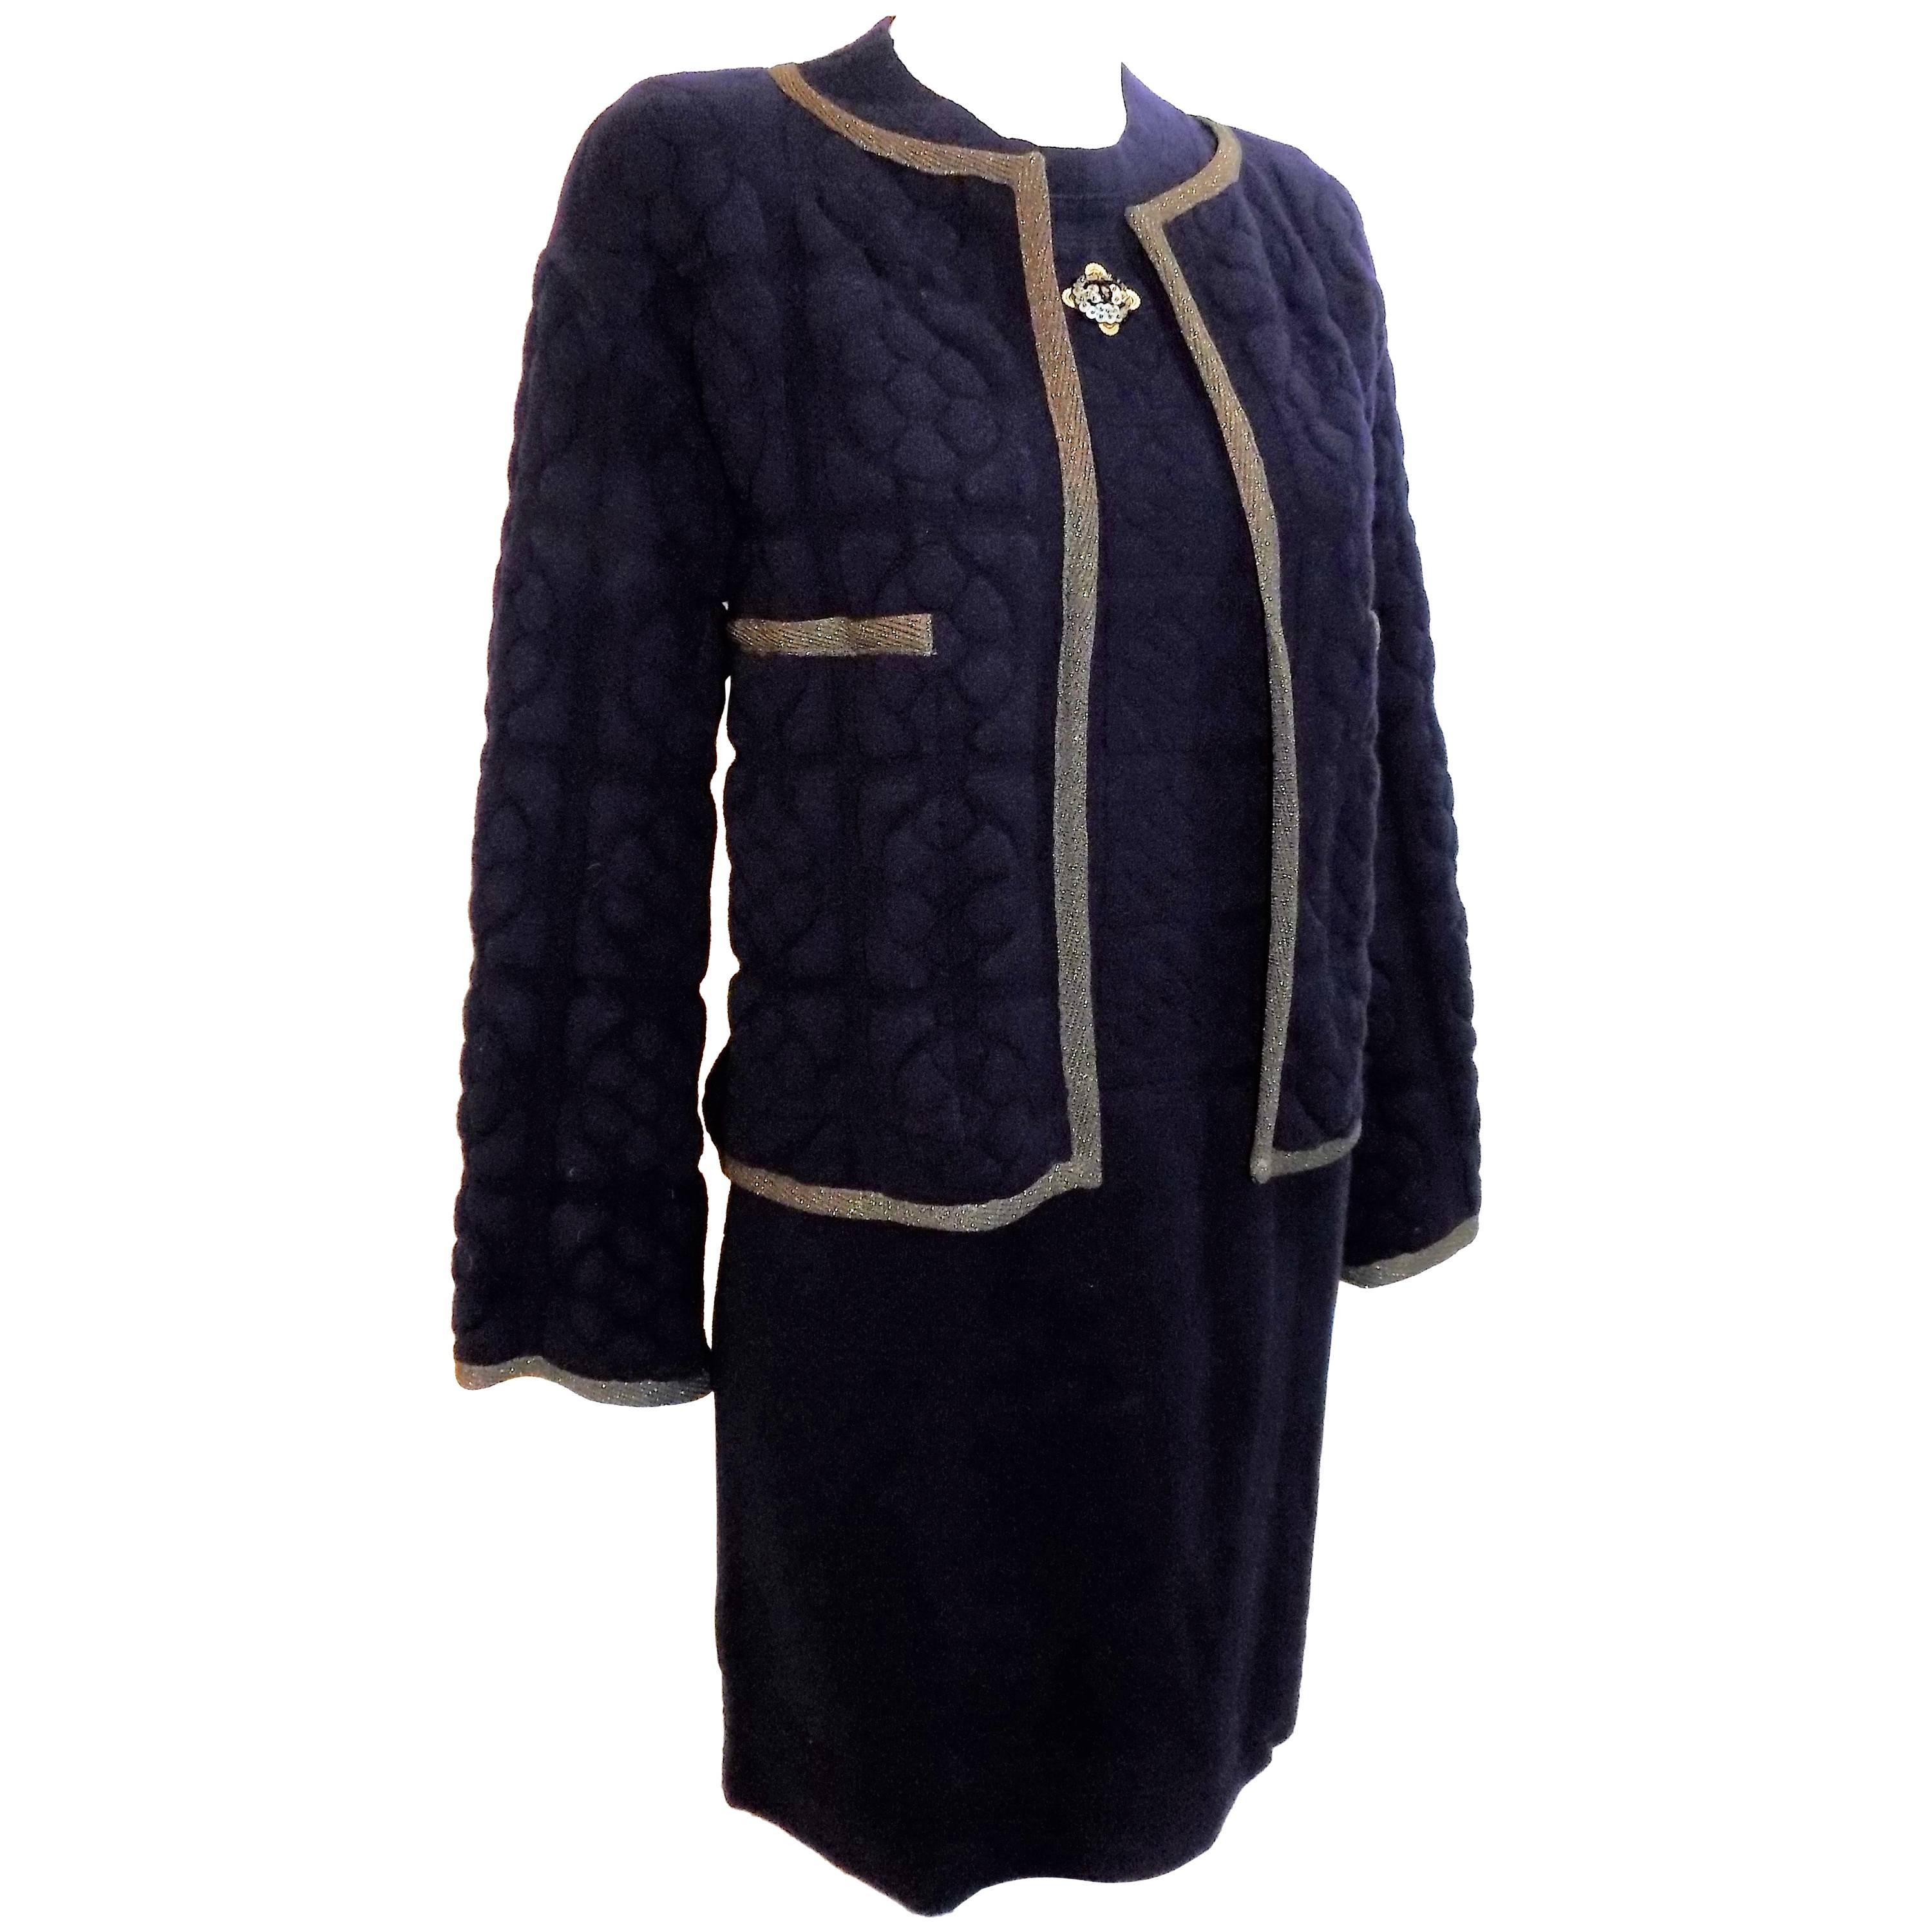 Chanel raise/ quilted knit navy dress and jacket with Lesage patch